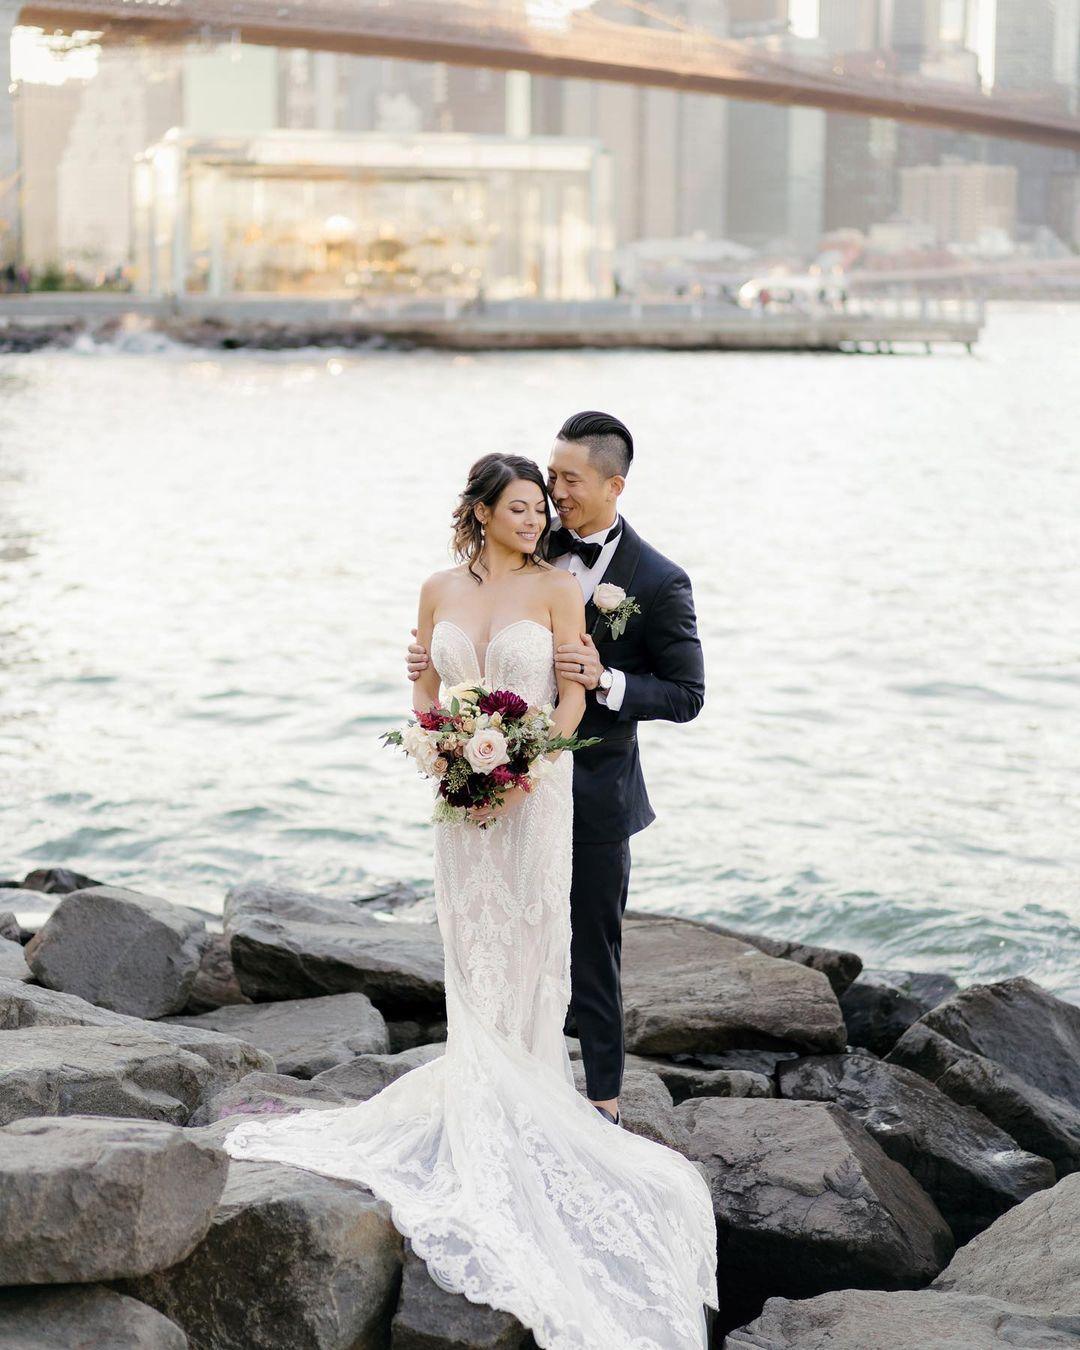 class="content__text"
 Congratulations to Danielle and Tommy!
⠀
MUAH: @akiyo_hairandmakeup 
Florals: @jtesta_designs 
Gown: @martinalianabridal 
⠀
 #nycweddingphotographer #brooklynweddingphotographer #dumbowedding #brooklynbridgewedding #brooklynbridgeengagement #nycskyline #nycviews 
 